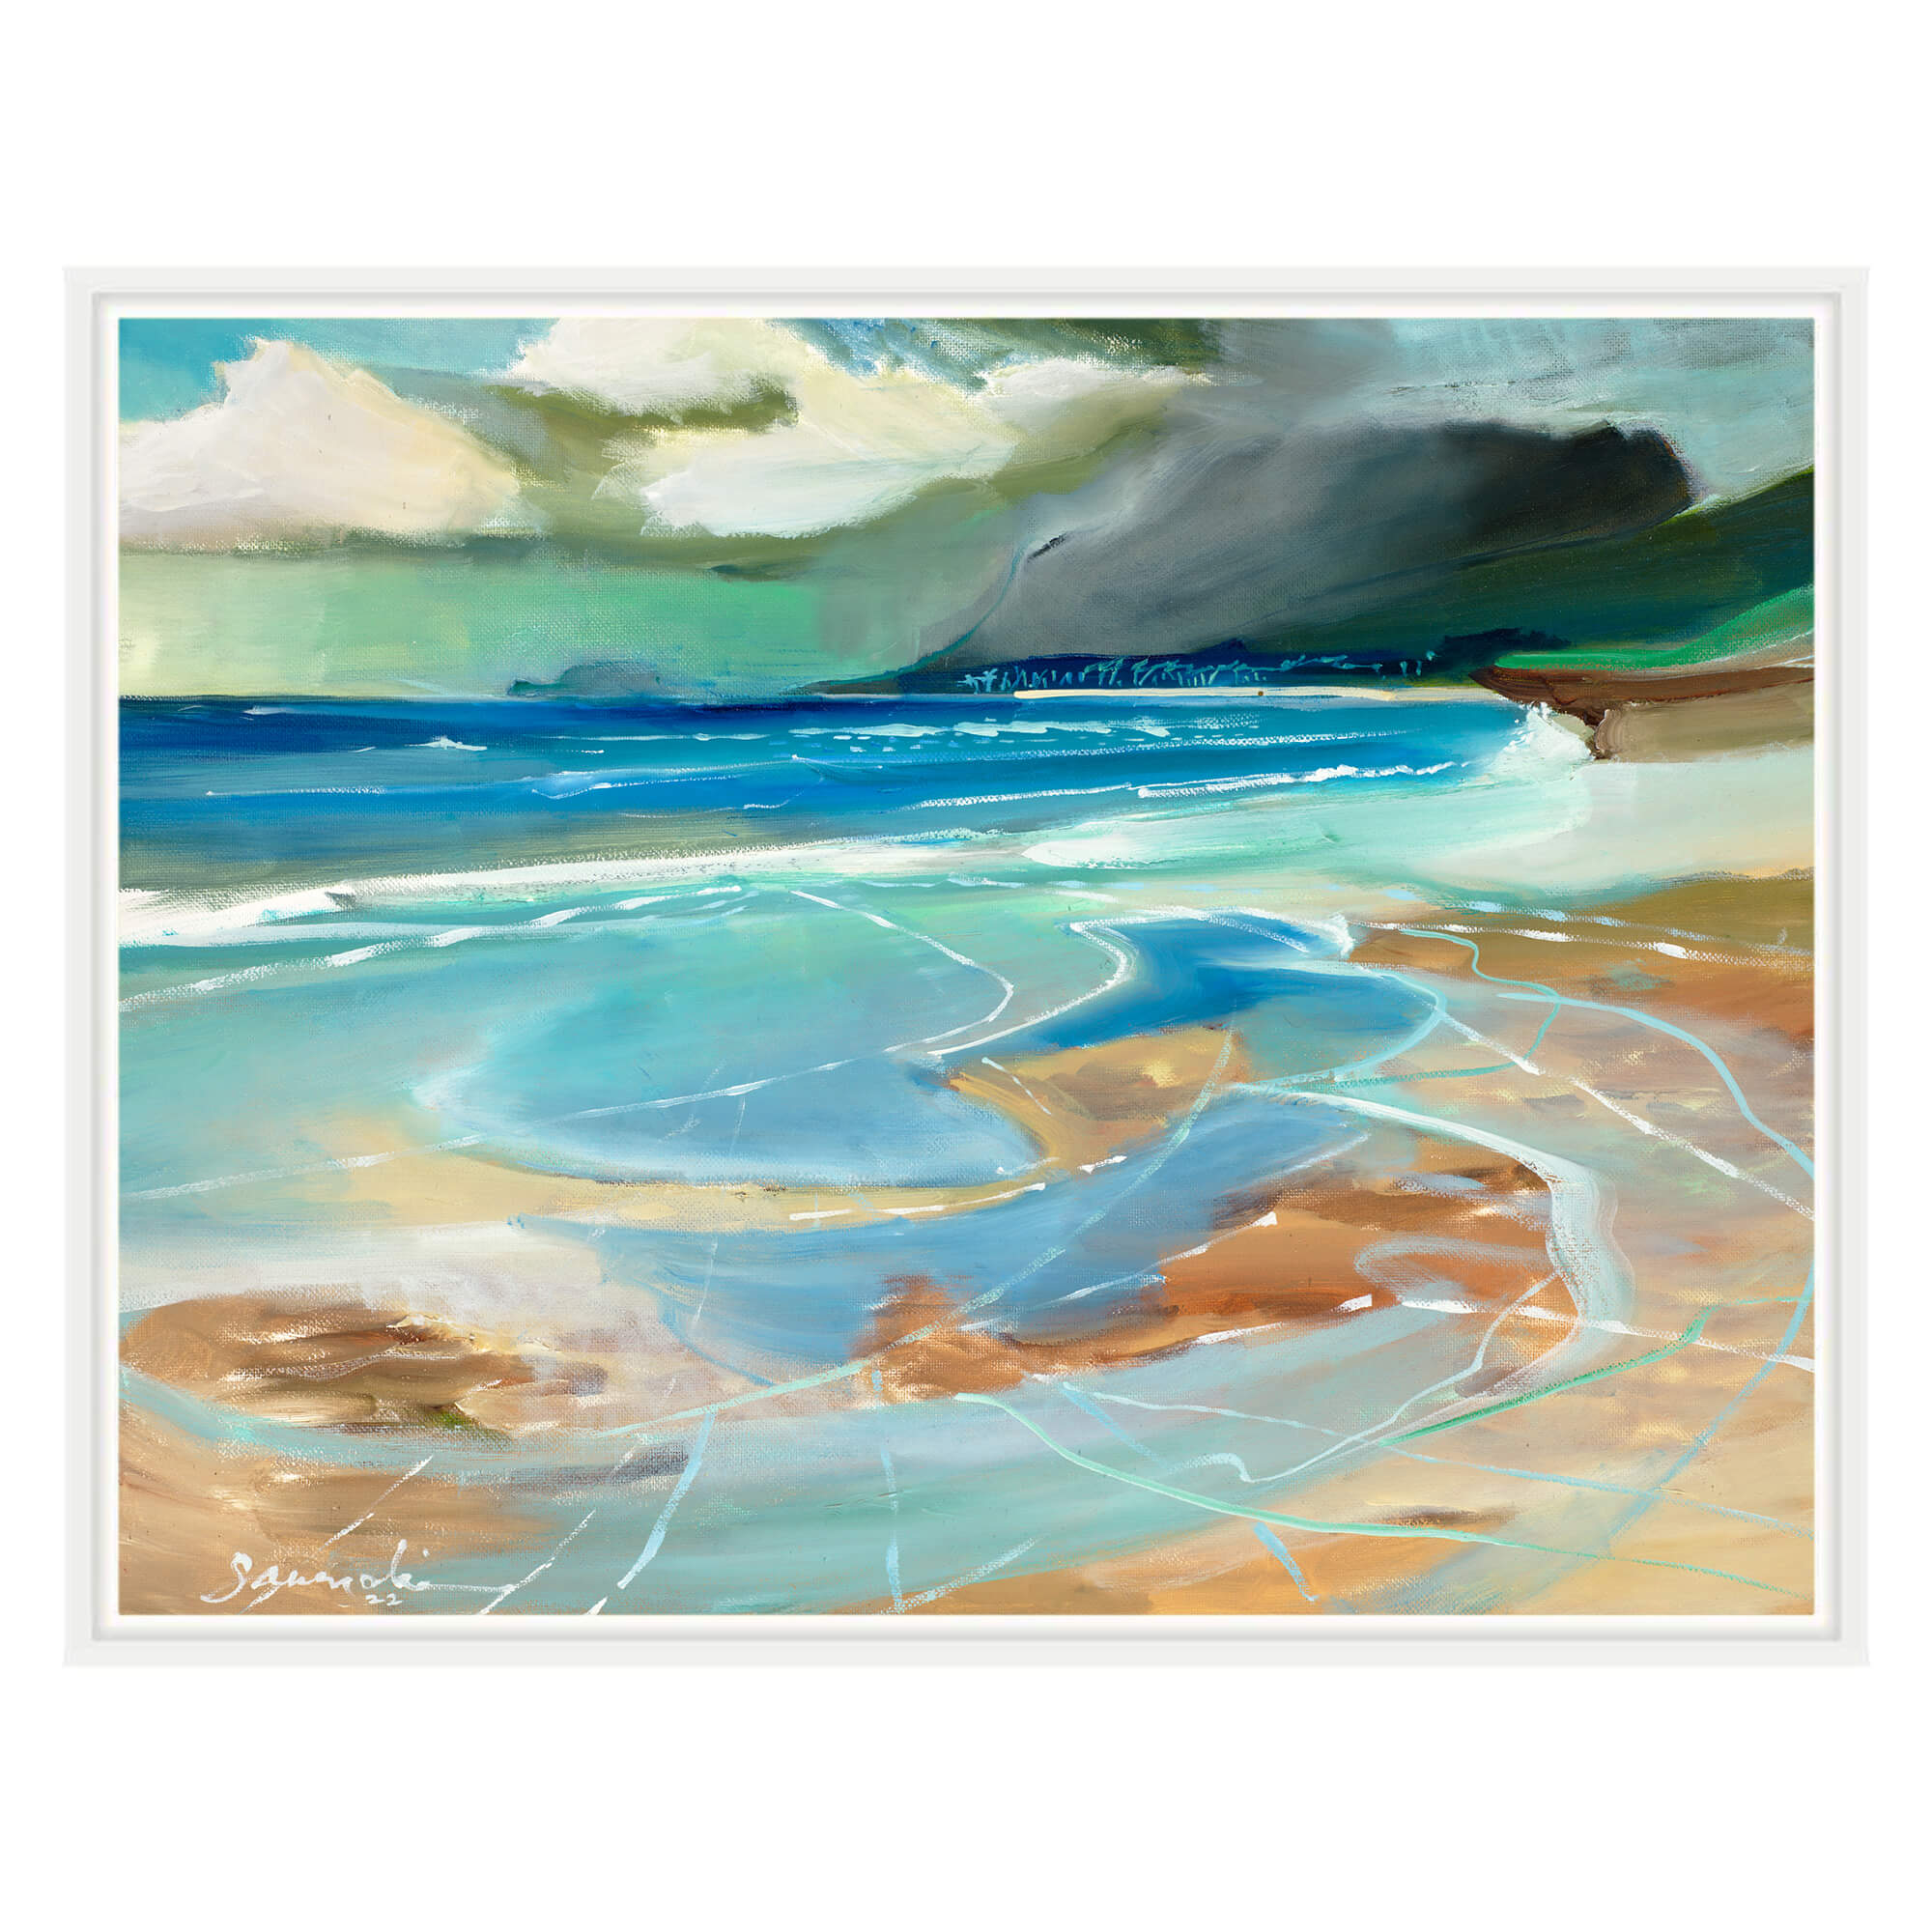 A pastel colored original painting featuring a seascape by Hawaii artist Saumolia Puapuaga